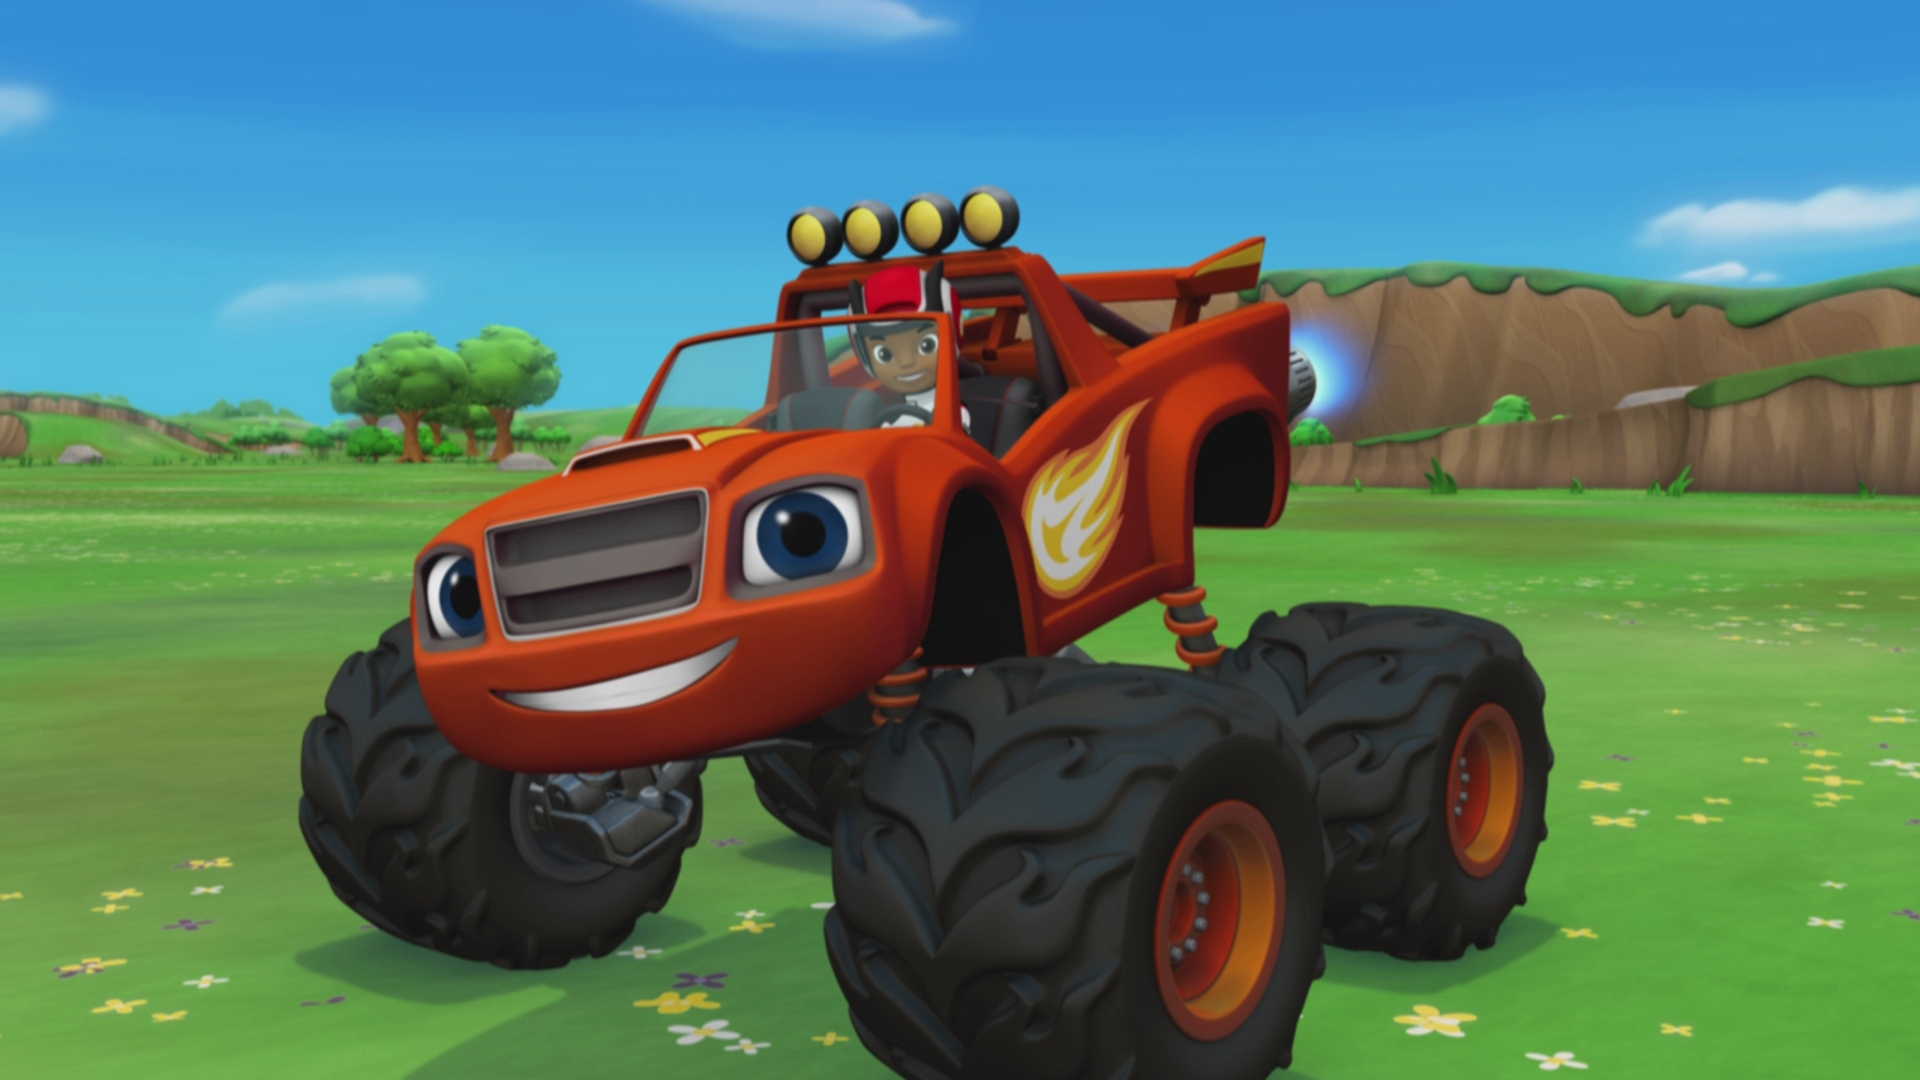 Watch Blaze and the Monster Machines Season 1 Episode 1: Blaze of Glory -  Full show on Paramount Plus